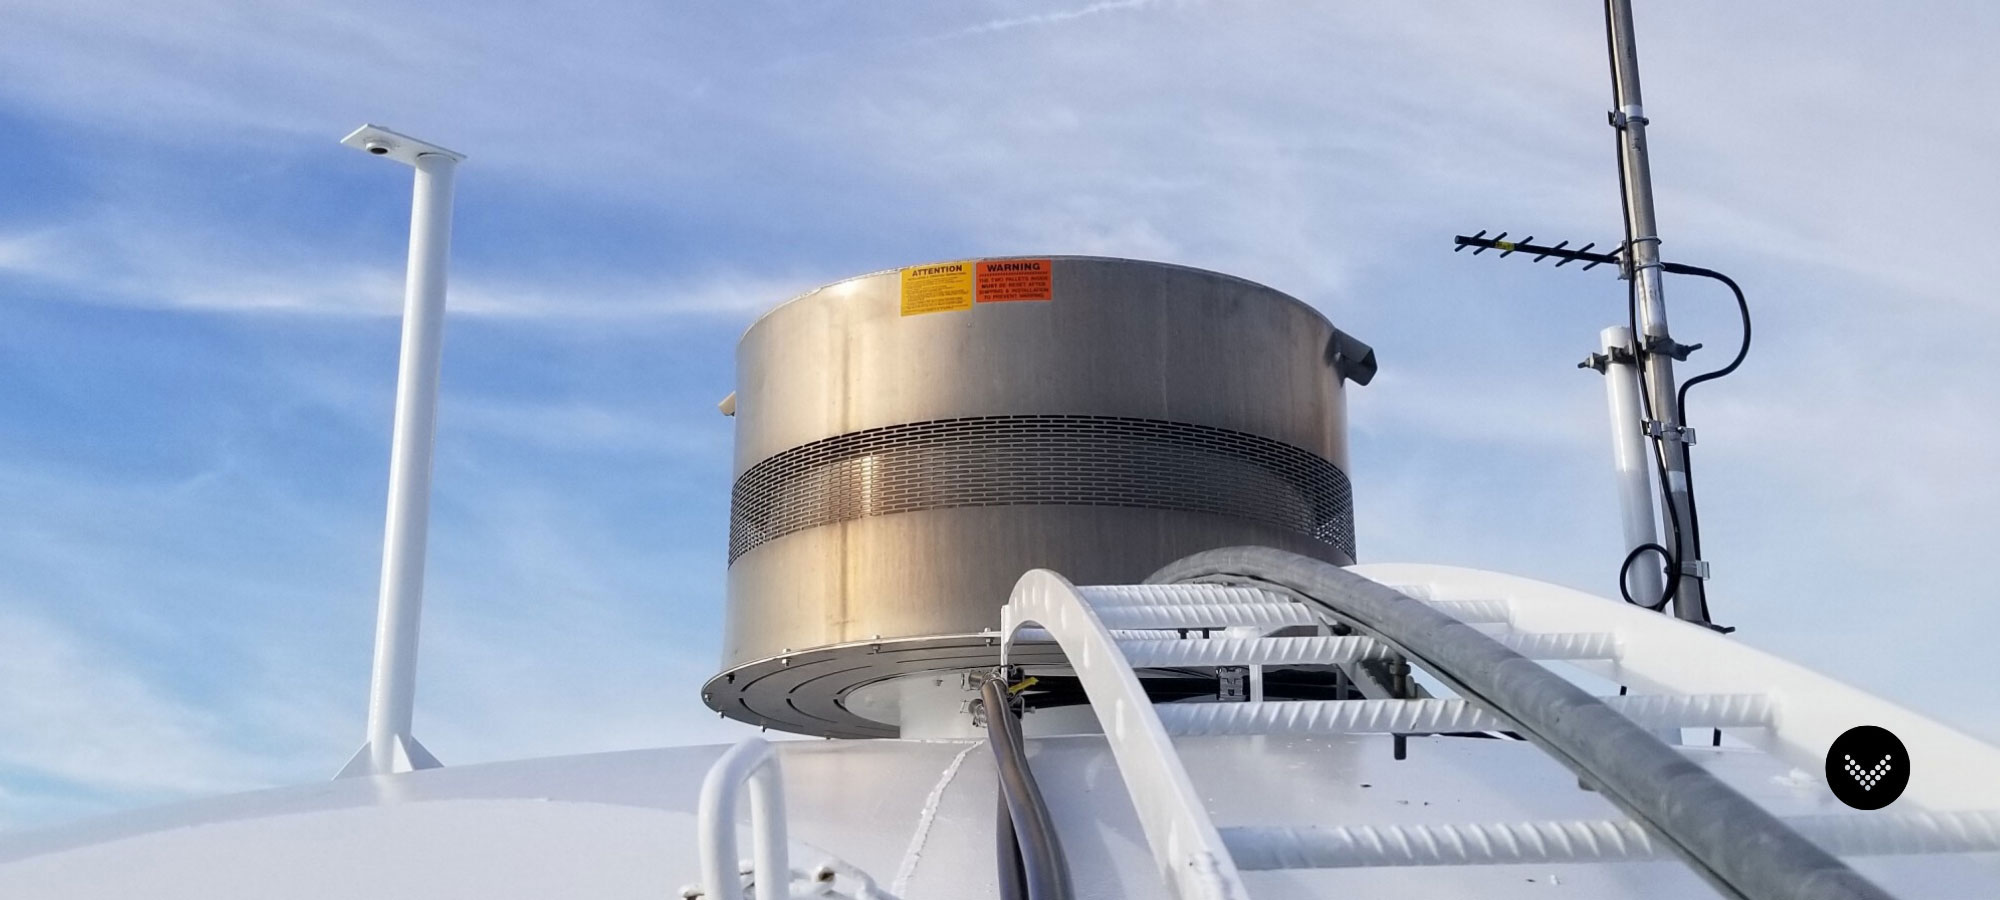 Top side of a water tank featuring the side bowl ladder, top vent, and communications antenna.